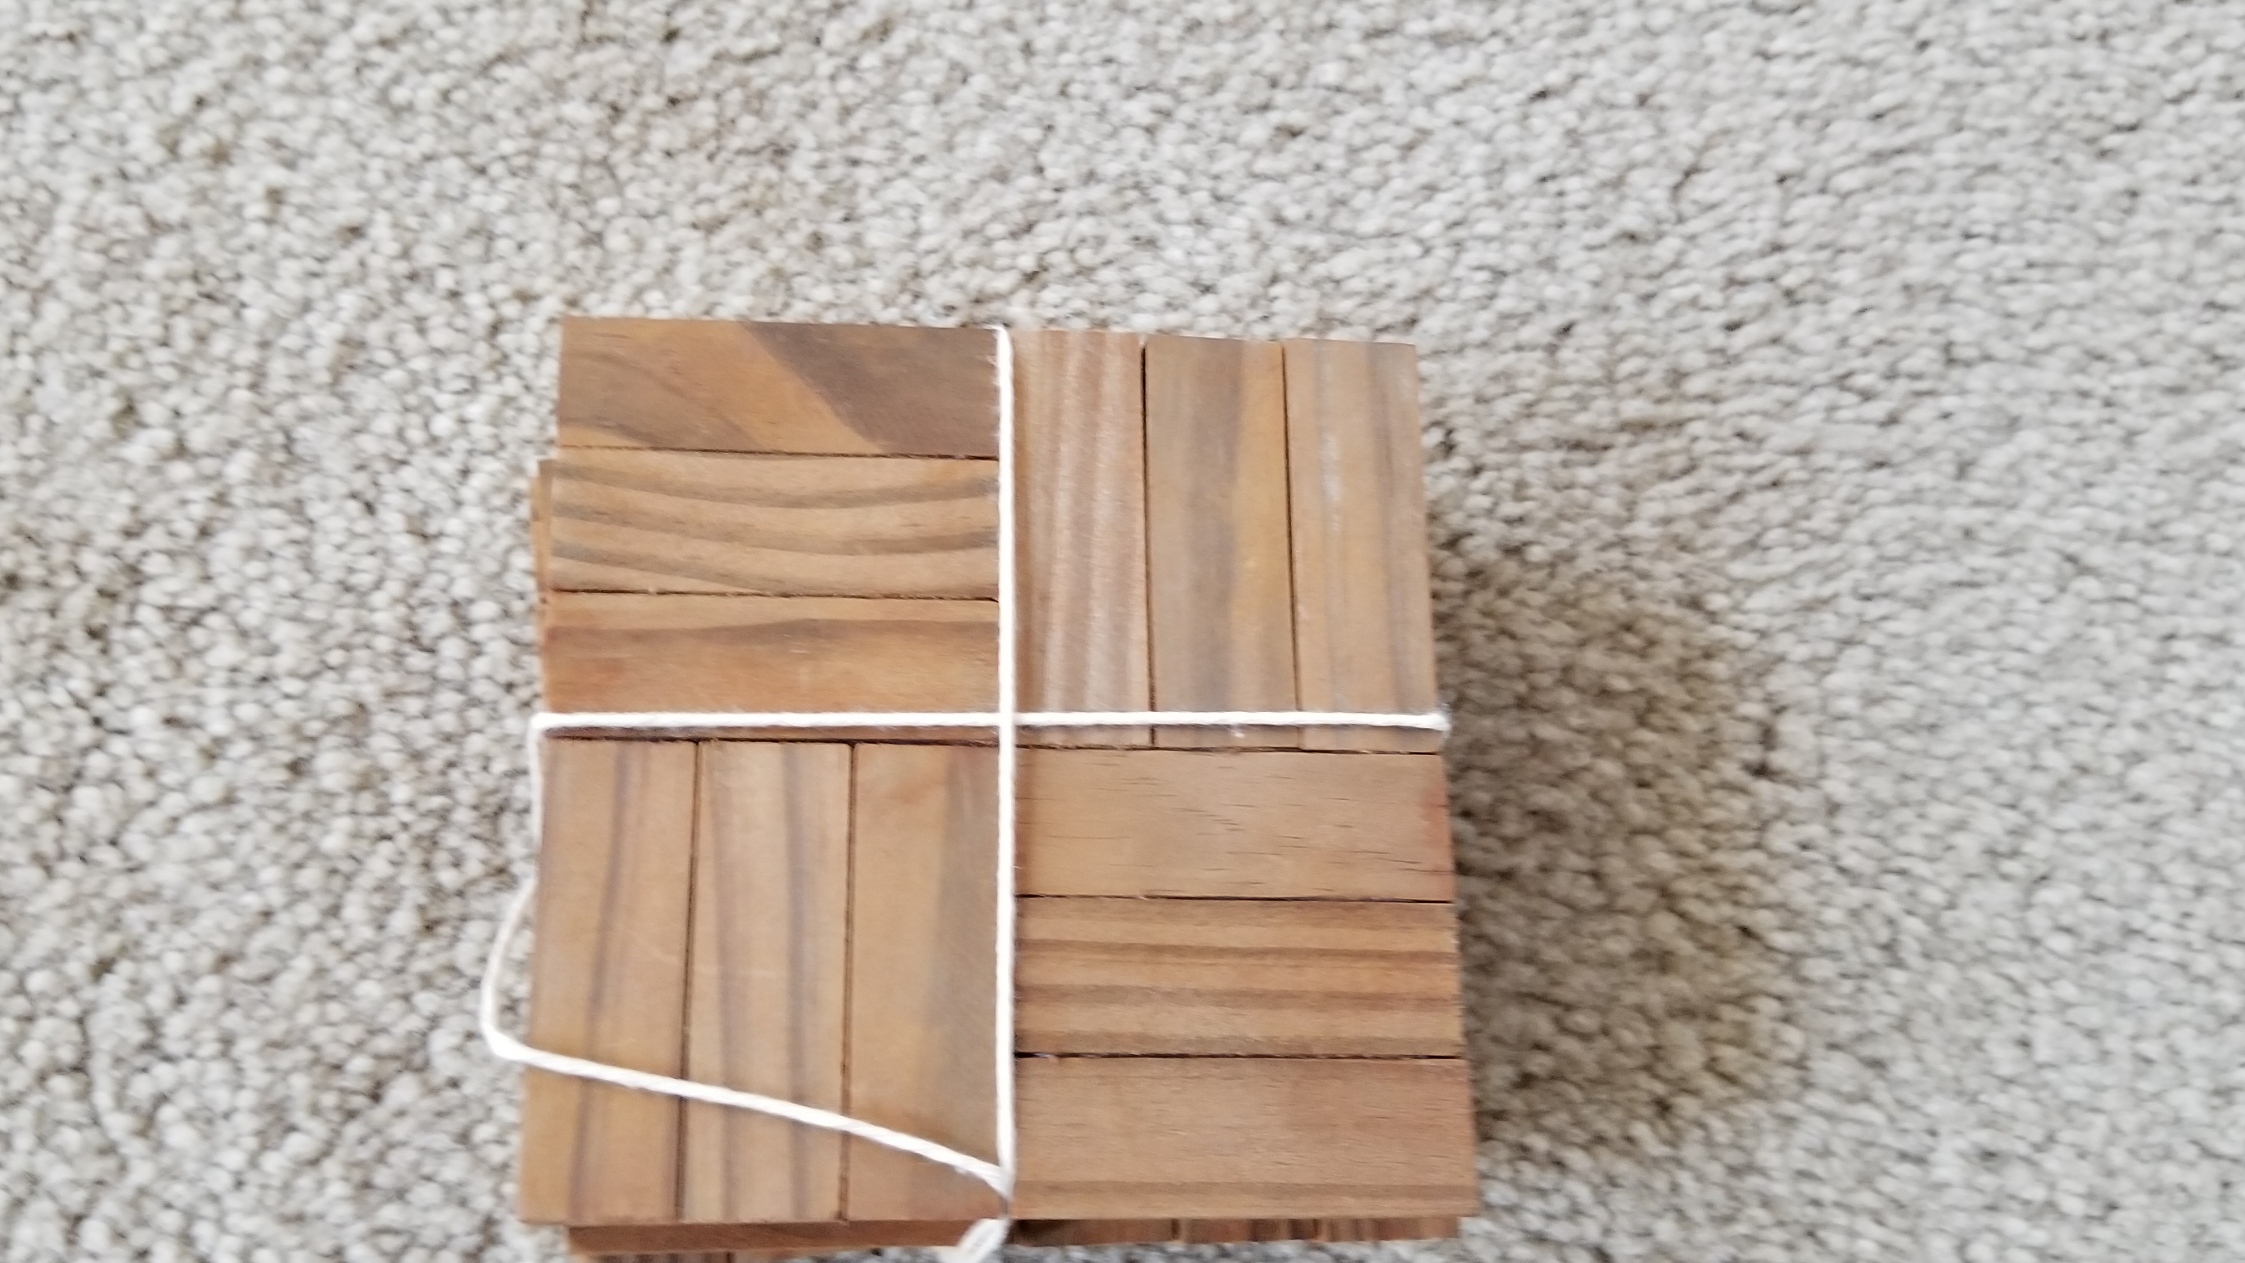 This Handmade Wood Parquet Coasters - set of 5 pieces is made with love by The Creative Soul Sisters! Shop more unique gift ideas today with Spots Initiatives, the best way to support creators.